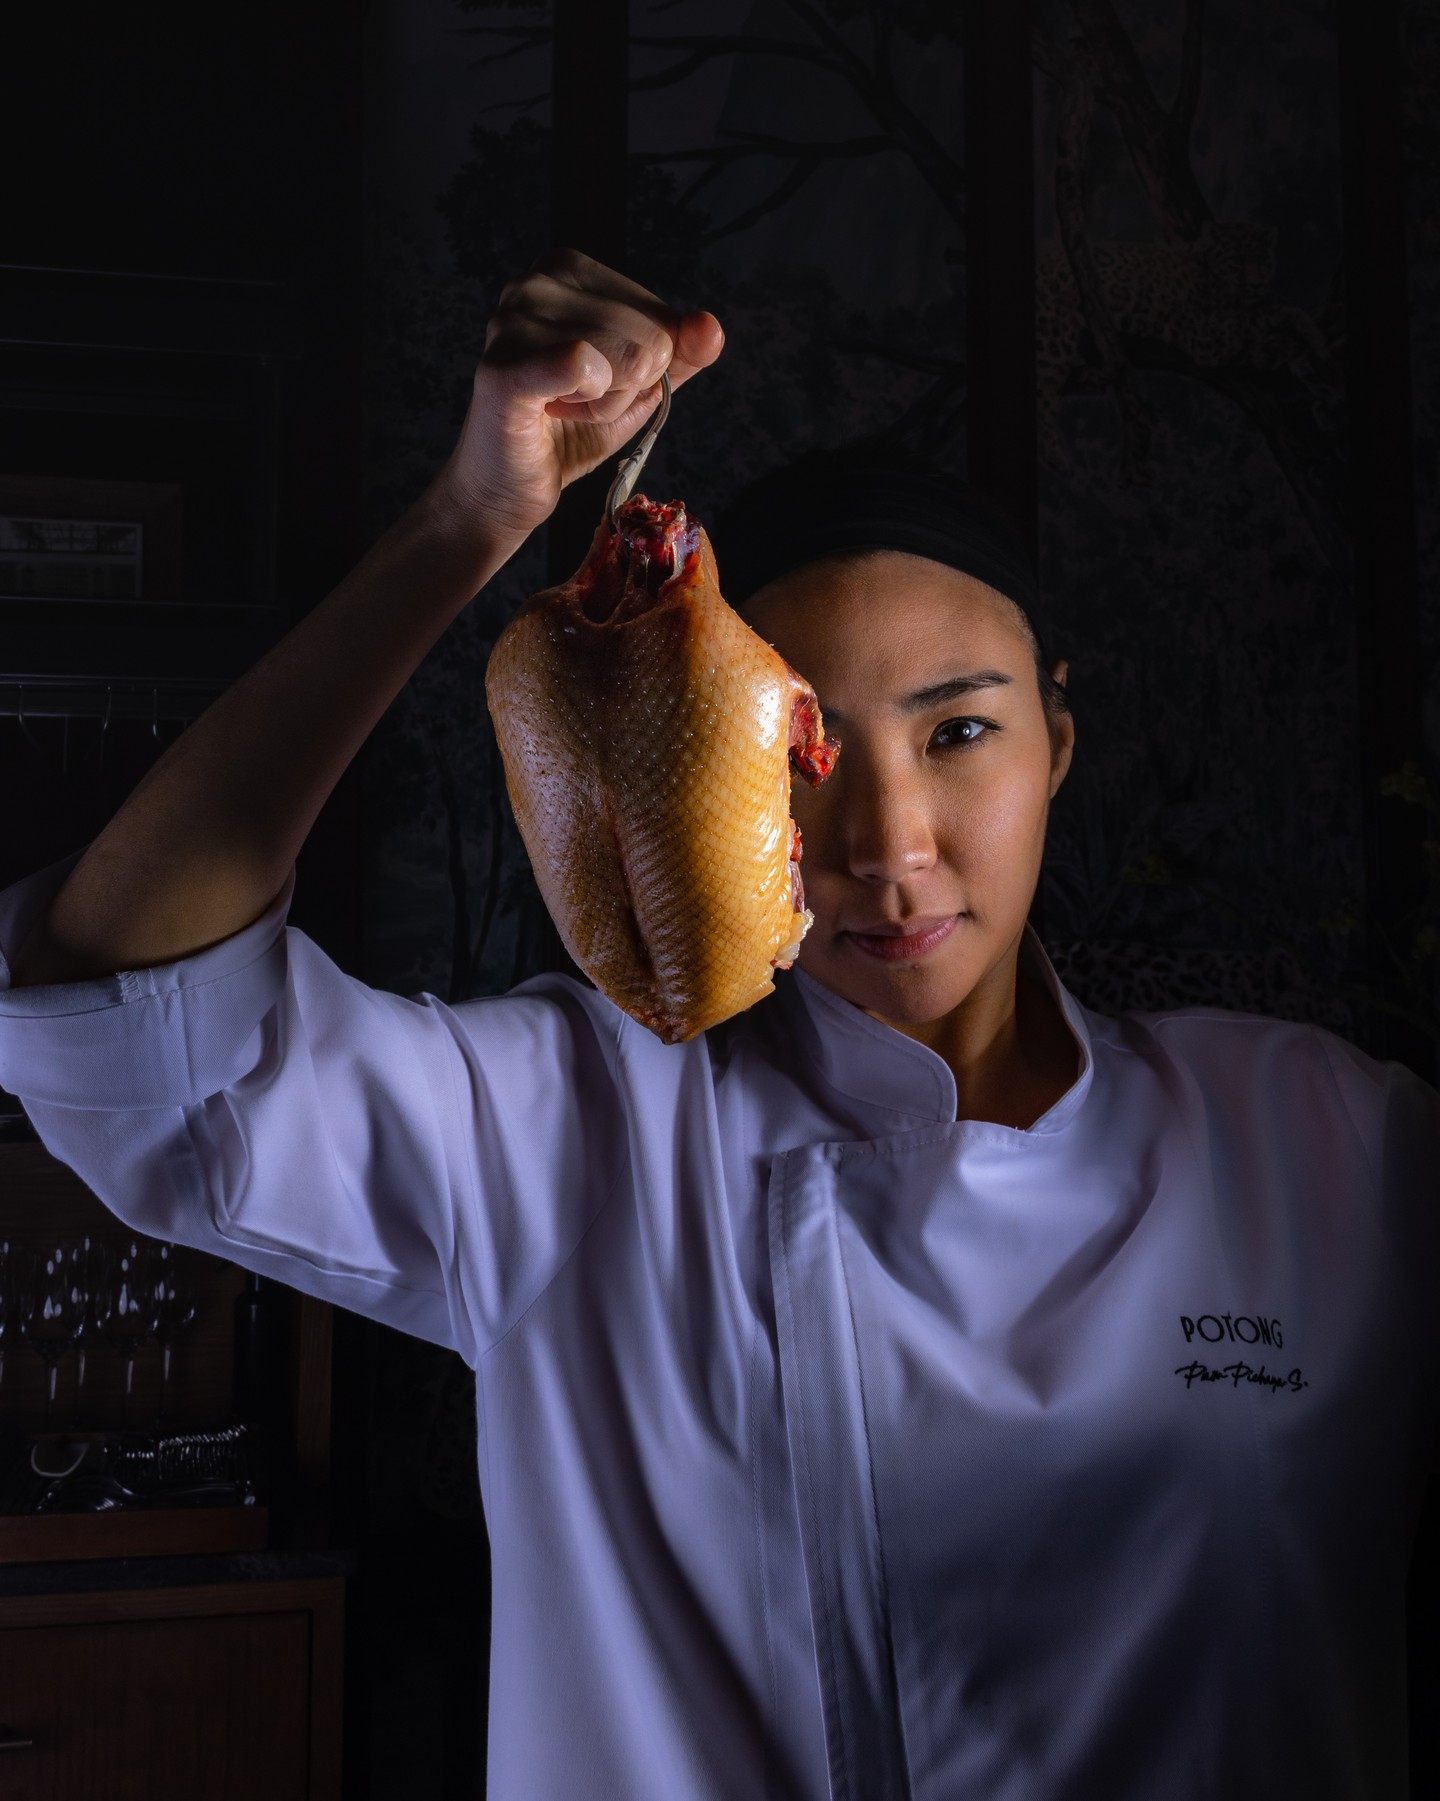 Chef Pichaya Soontornyanakij, known as chef Pam, of Potong in Bangkok’s Chinatown. Thai cuisine is undergoing a revolution. Meet some of the young chefs leading the charge. Photo: Gastrofilm